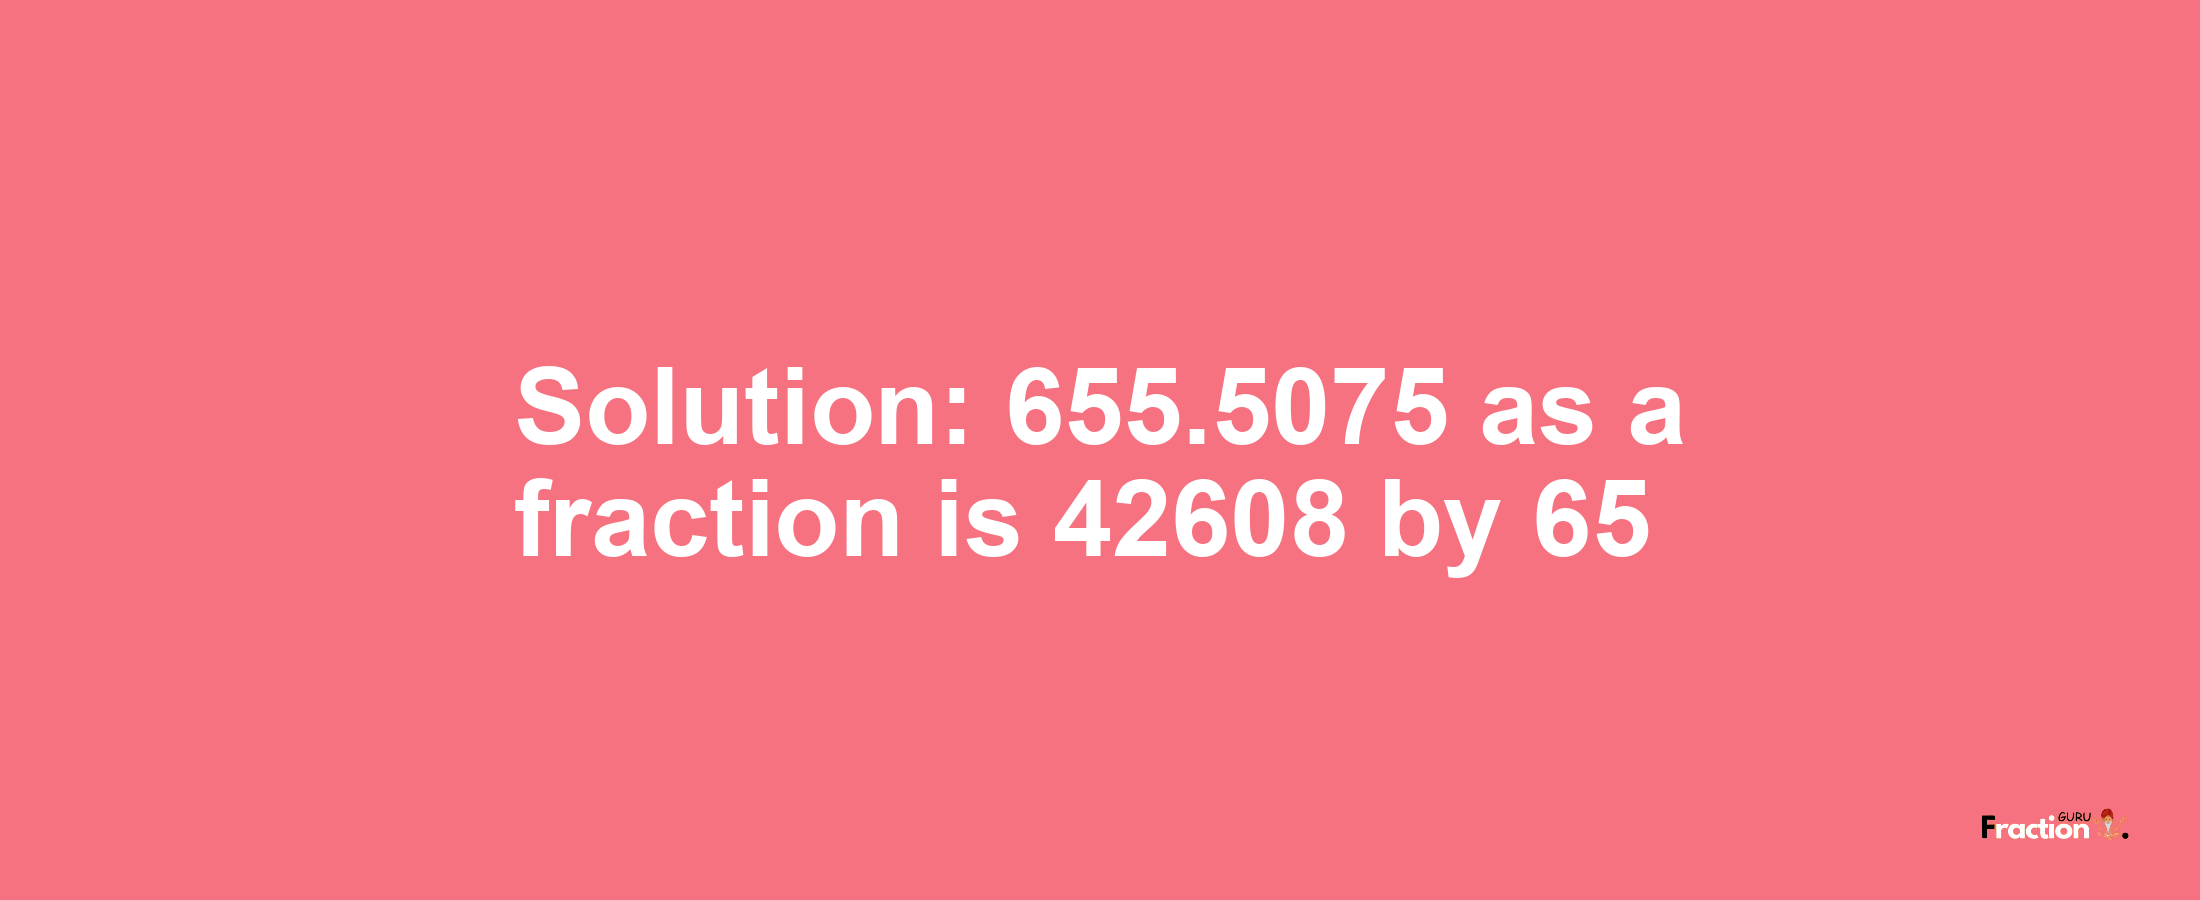 Solution:655.5075 as a fraction is 42608/65